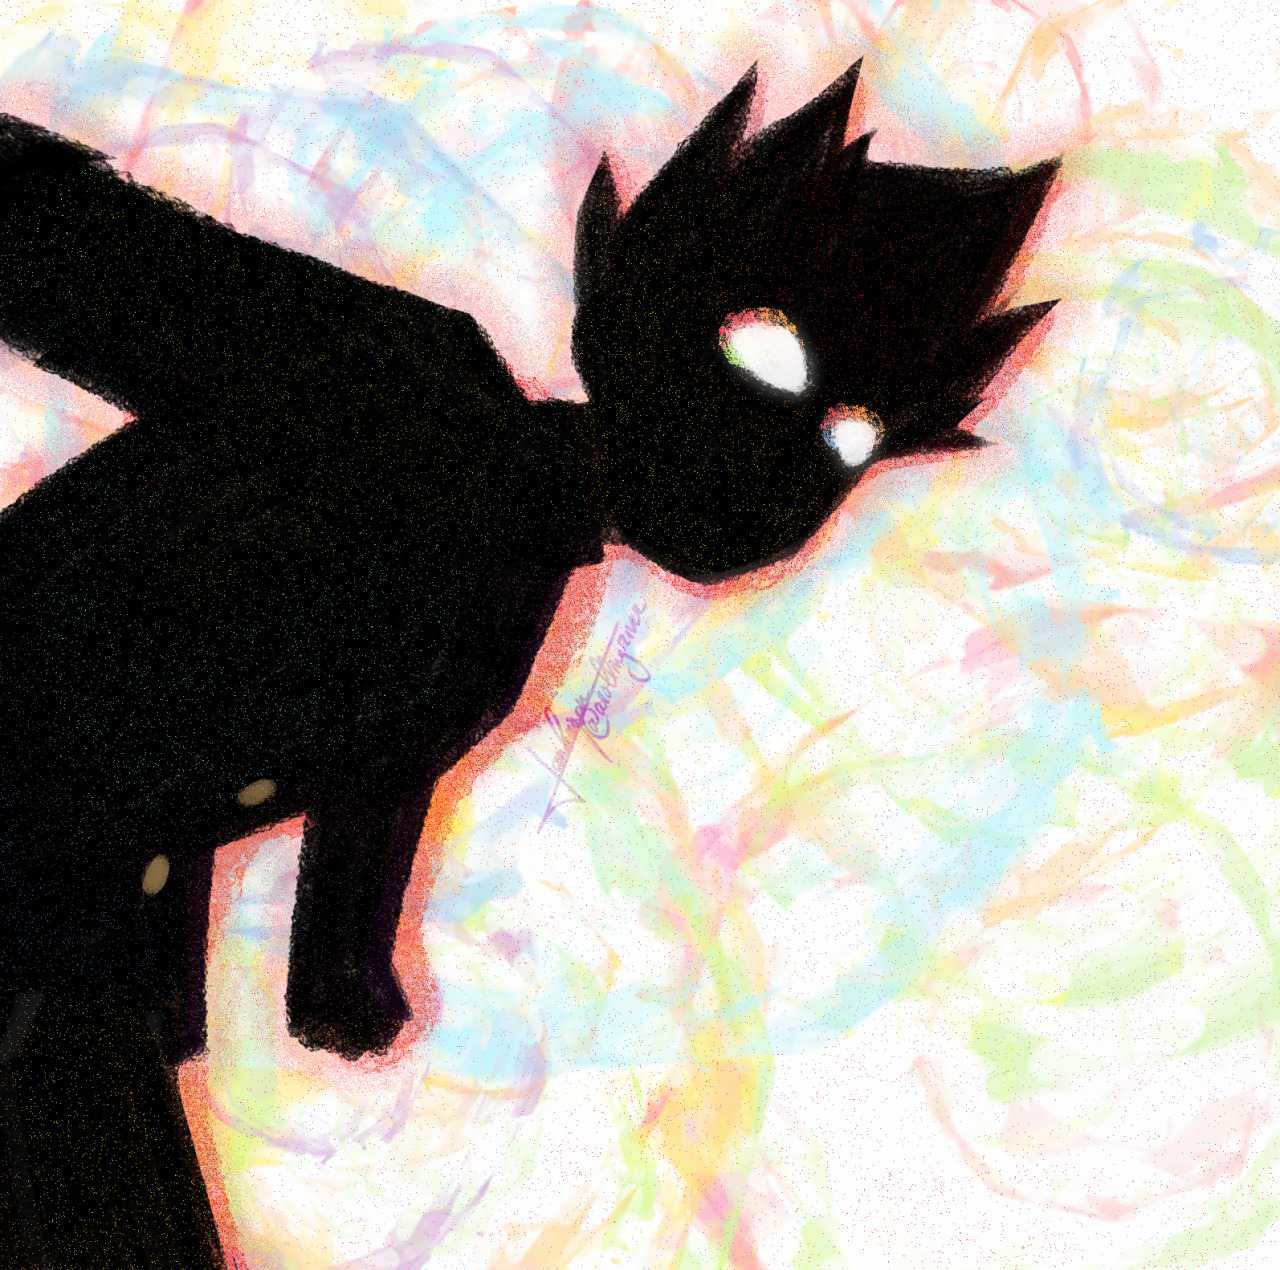 A redraw of Mob from Season 3 Episode 10. He is leaning towards the viewer. Although he appears as a black shape with white eyes on a white background, he is covered and surrounded by rainbow details, dots and textures.